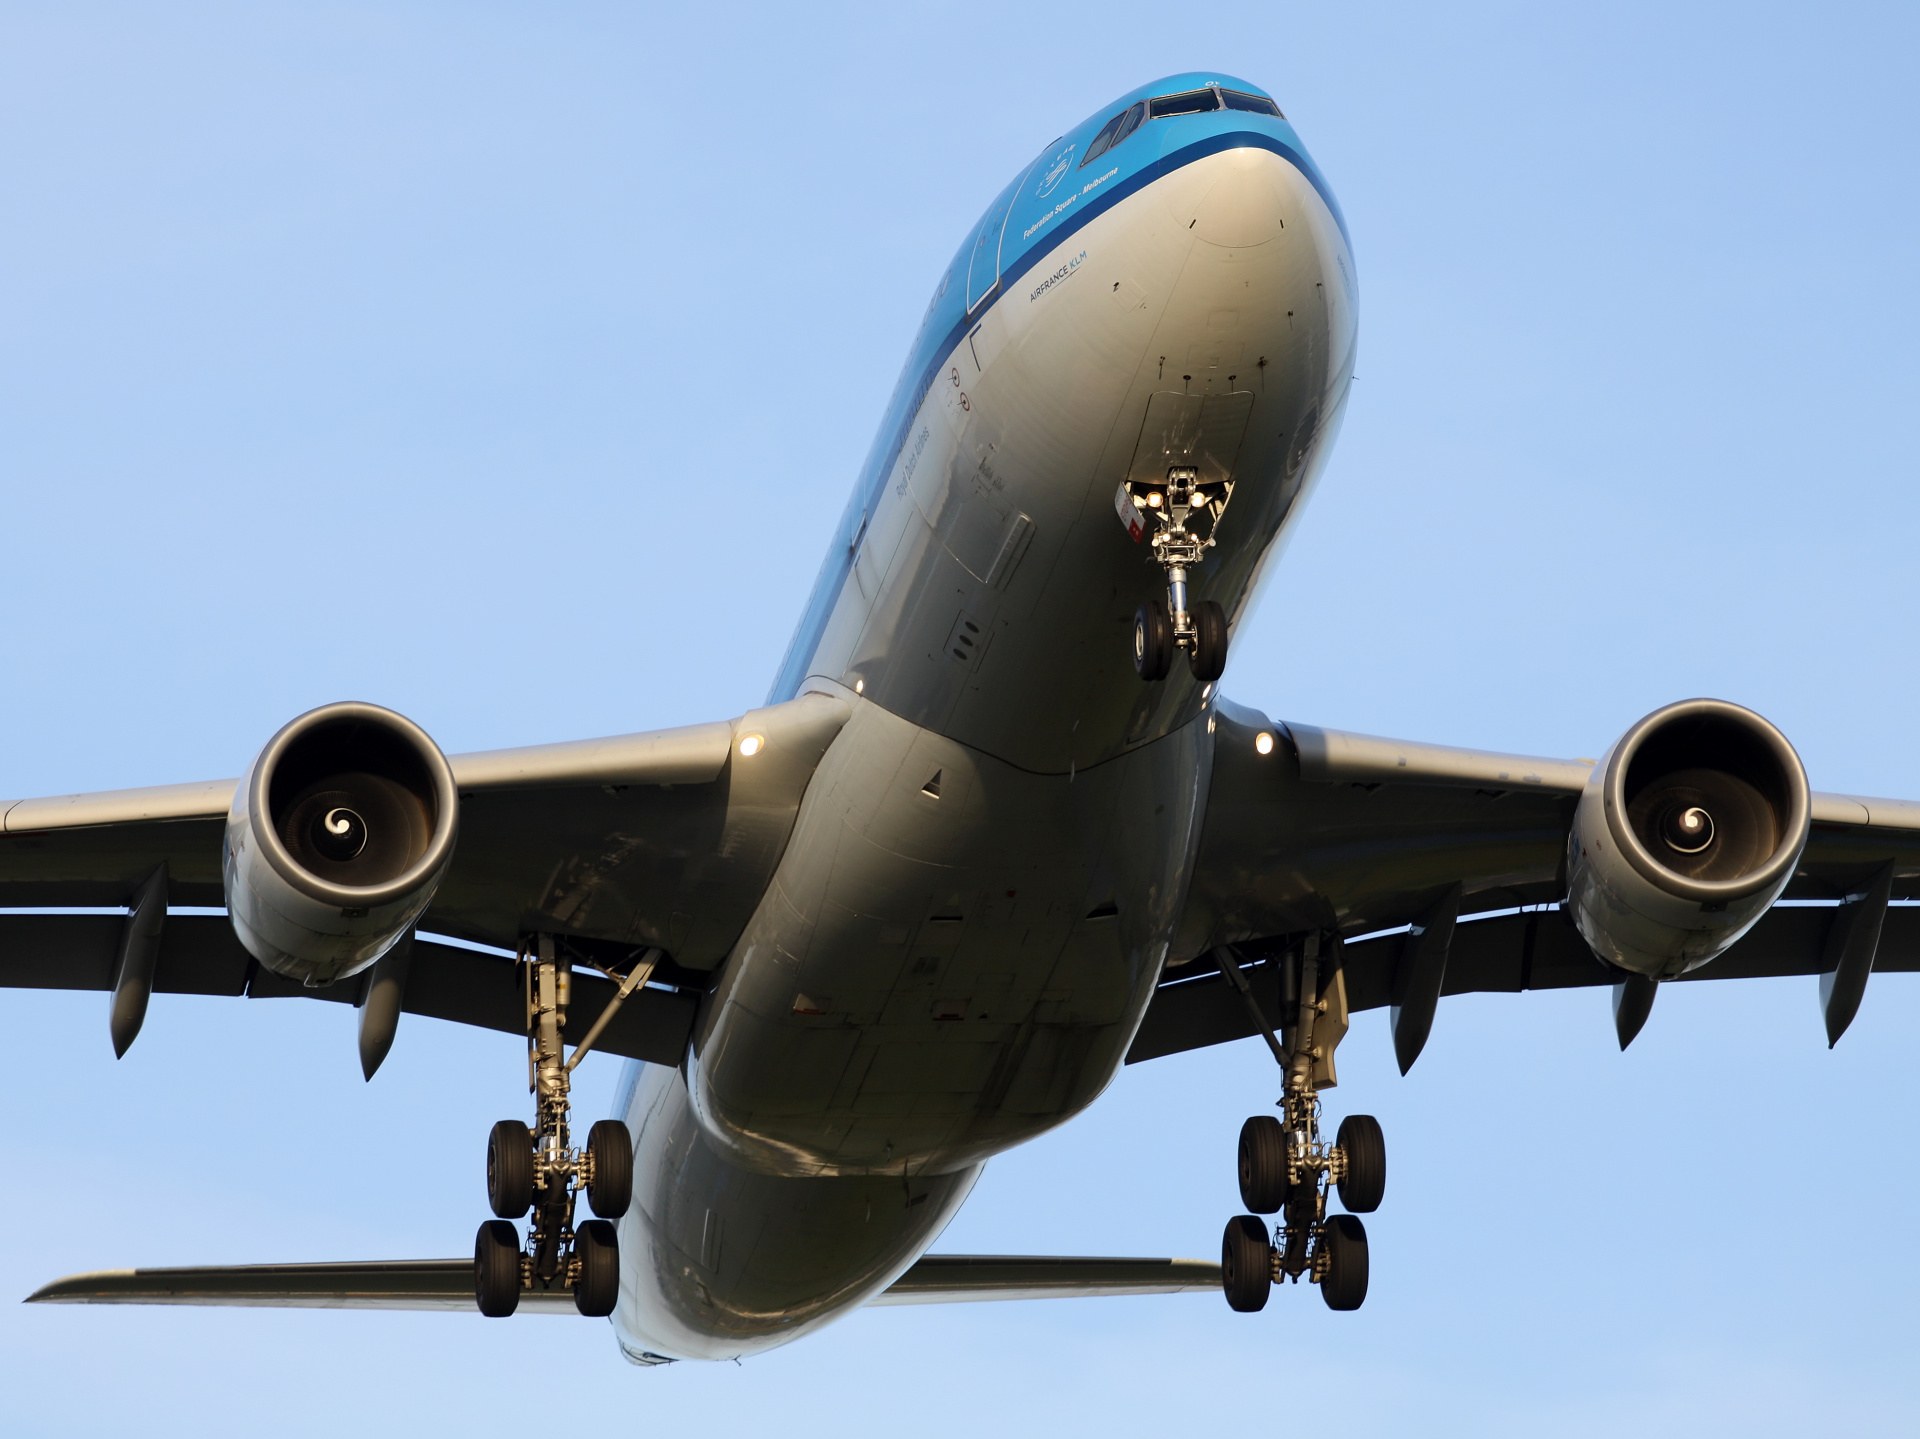 PH-AOF (Samoloty » Spotting na Schiphol » Airbus A330-200 » KLM Royal Dutch Airlines)